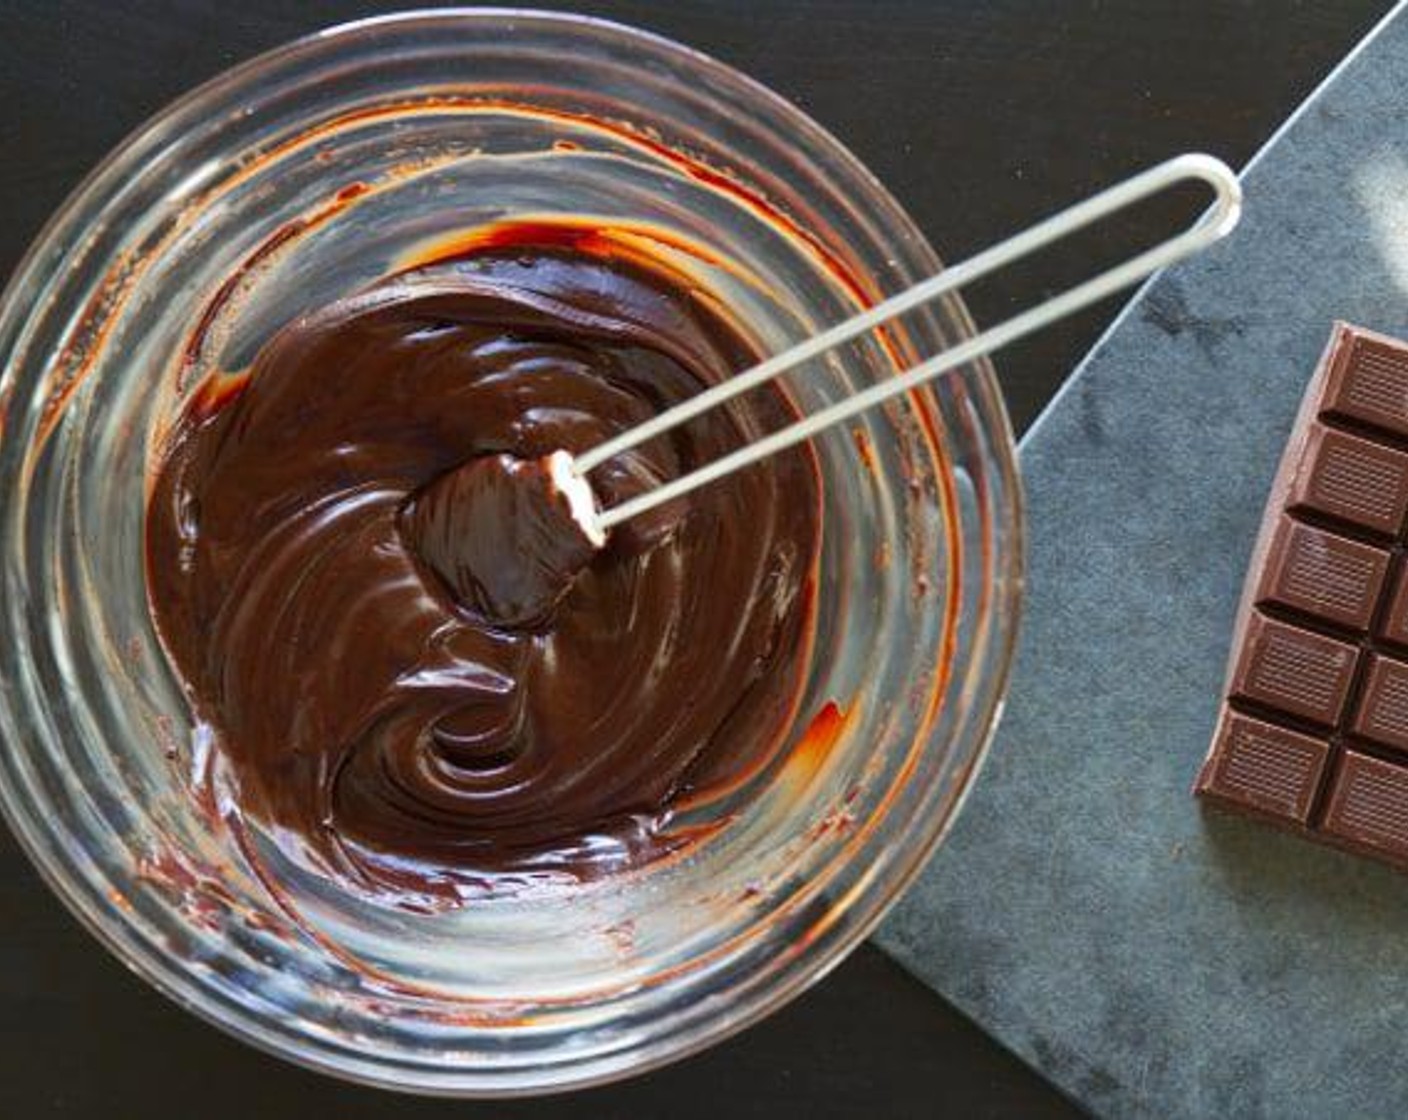 step 1 Heat the Heavy Cream (1/2 cup) until in just bubbles. Pour over the Dark Chocolate (1 1/4 cups) and Rum (1/4 cup). Mix well with a rubber spatula. If you still have lumps, put the bowl over a bain marie and mix until smooth.